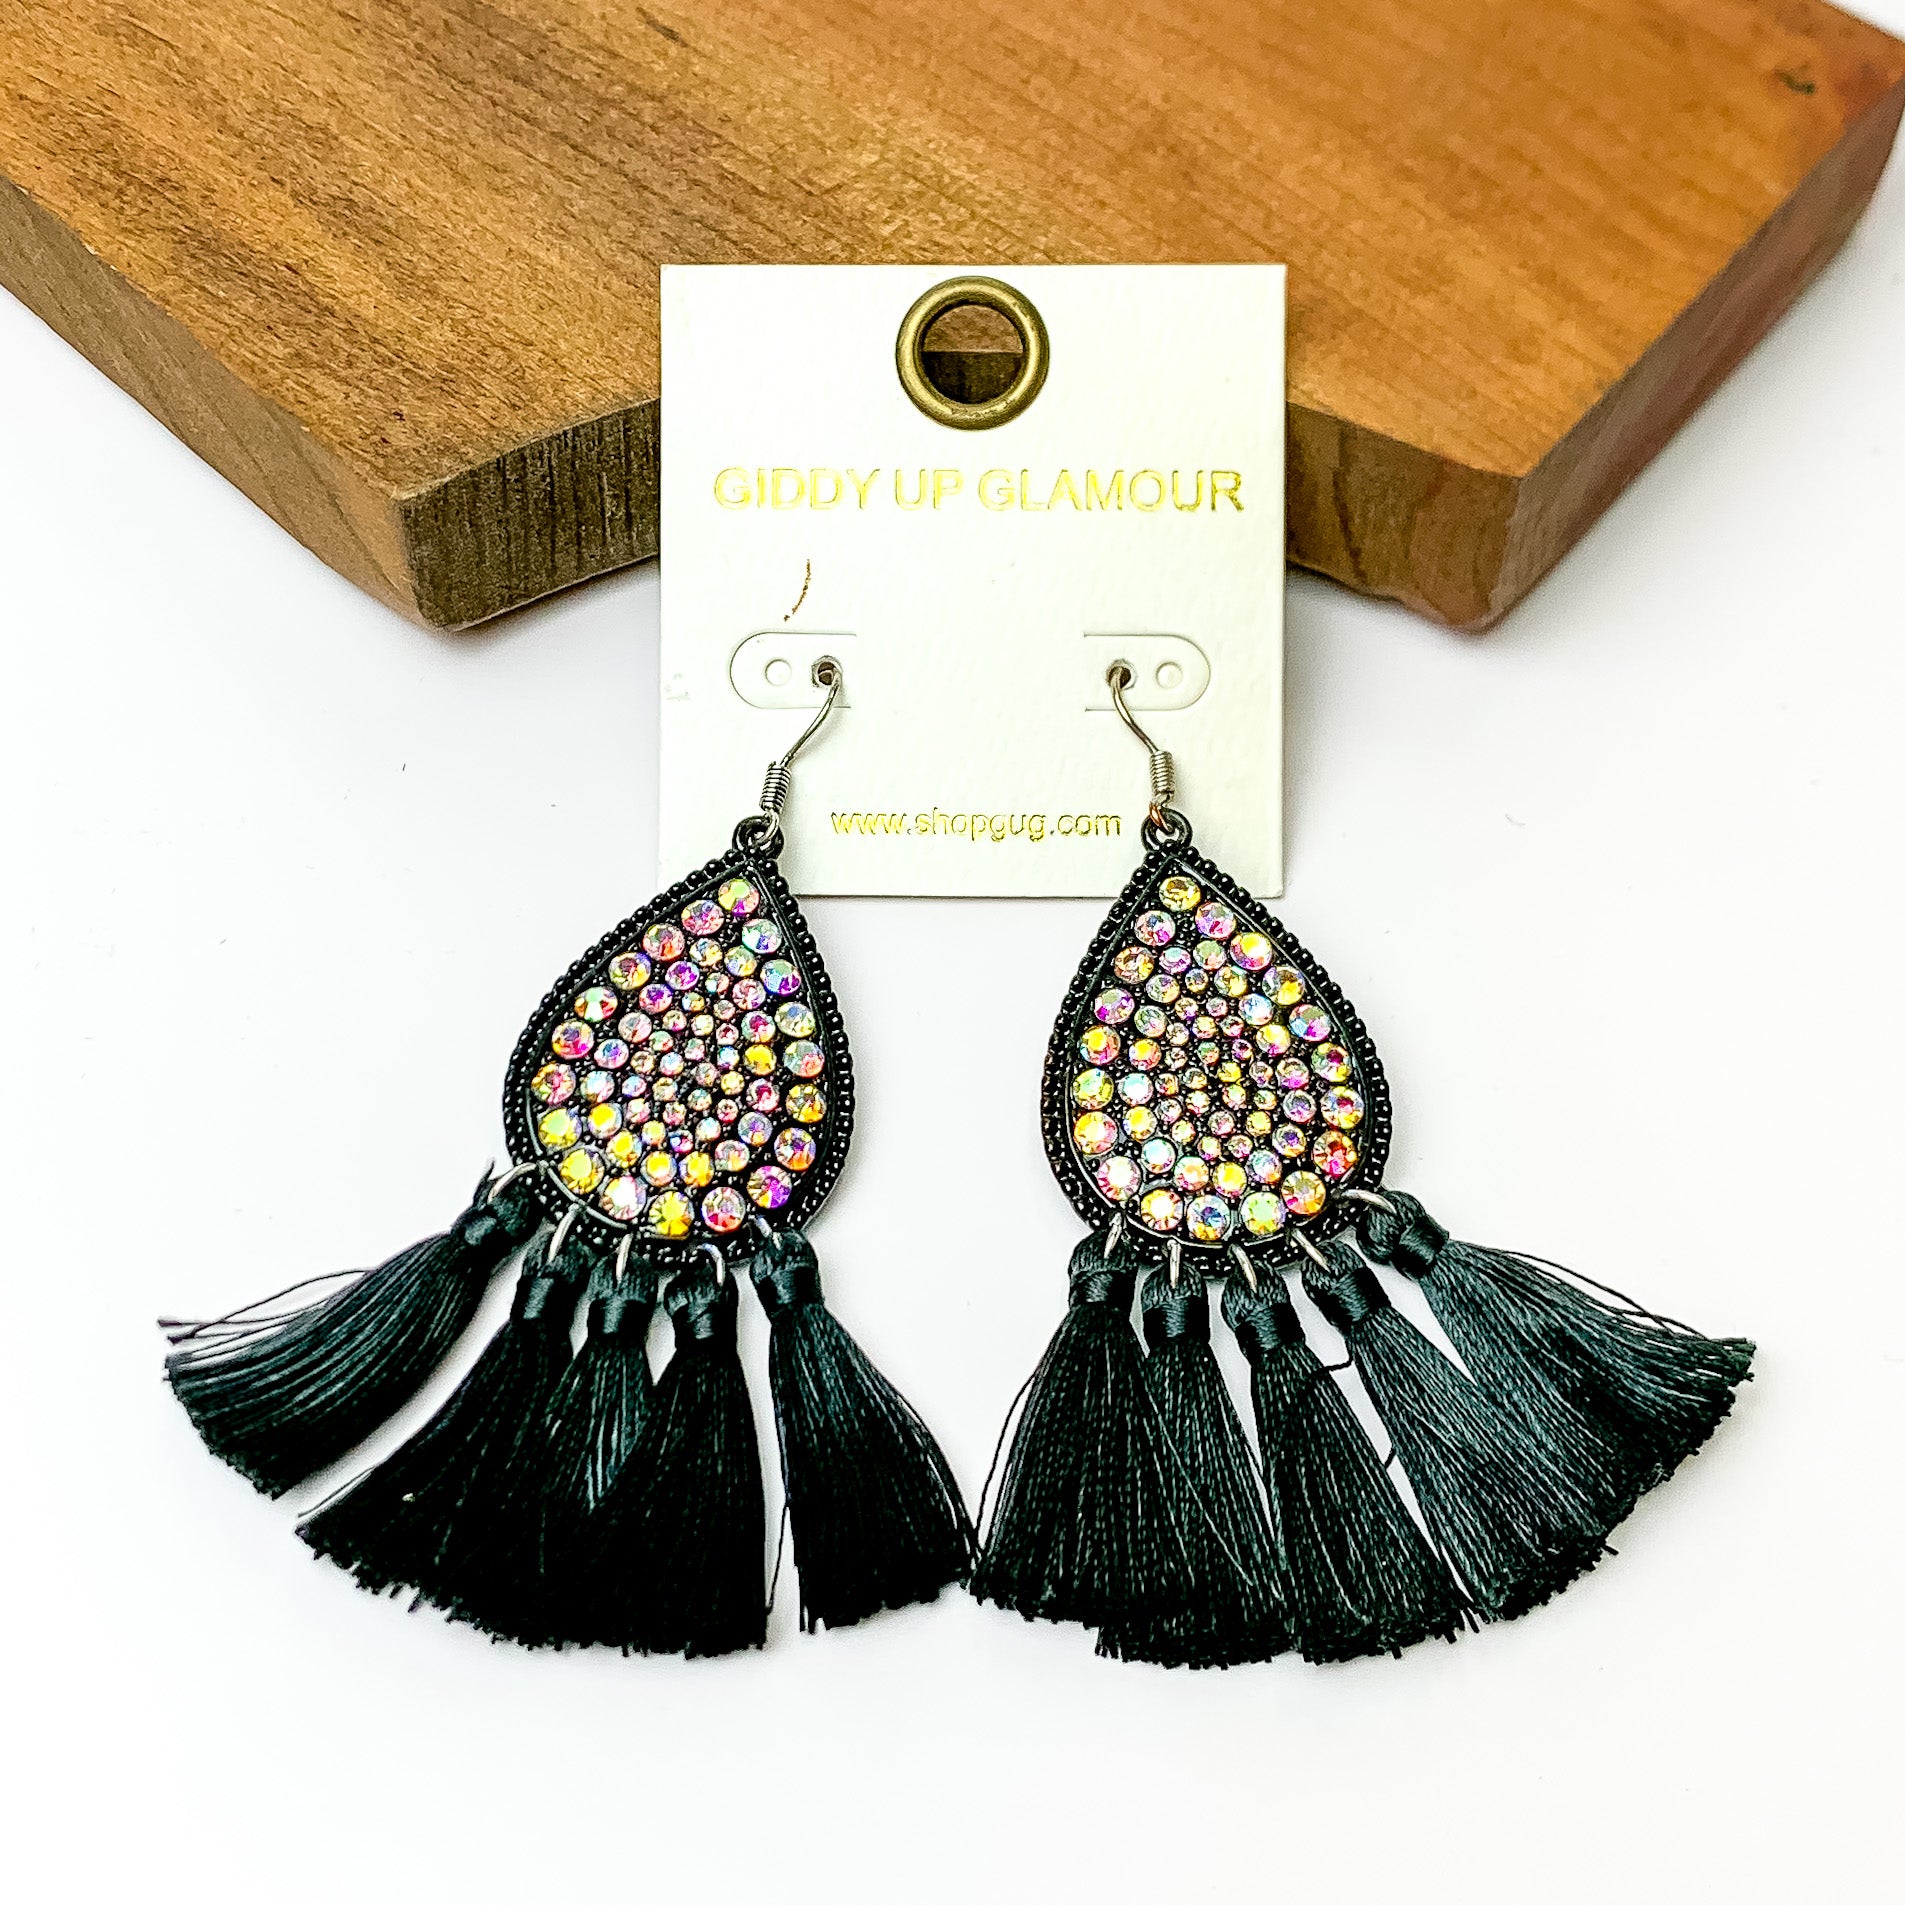 AB crystal drop earrings with black tassels. Pictured on a white background and a wood piece at the top.